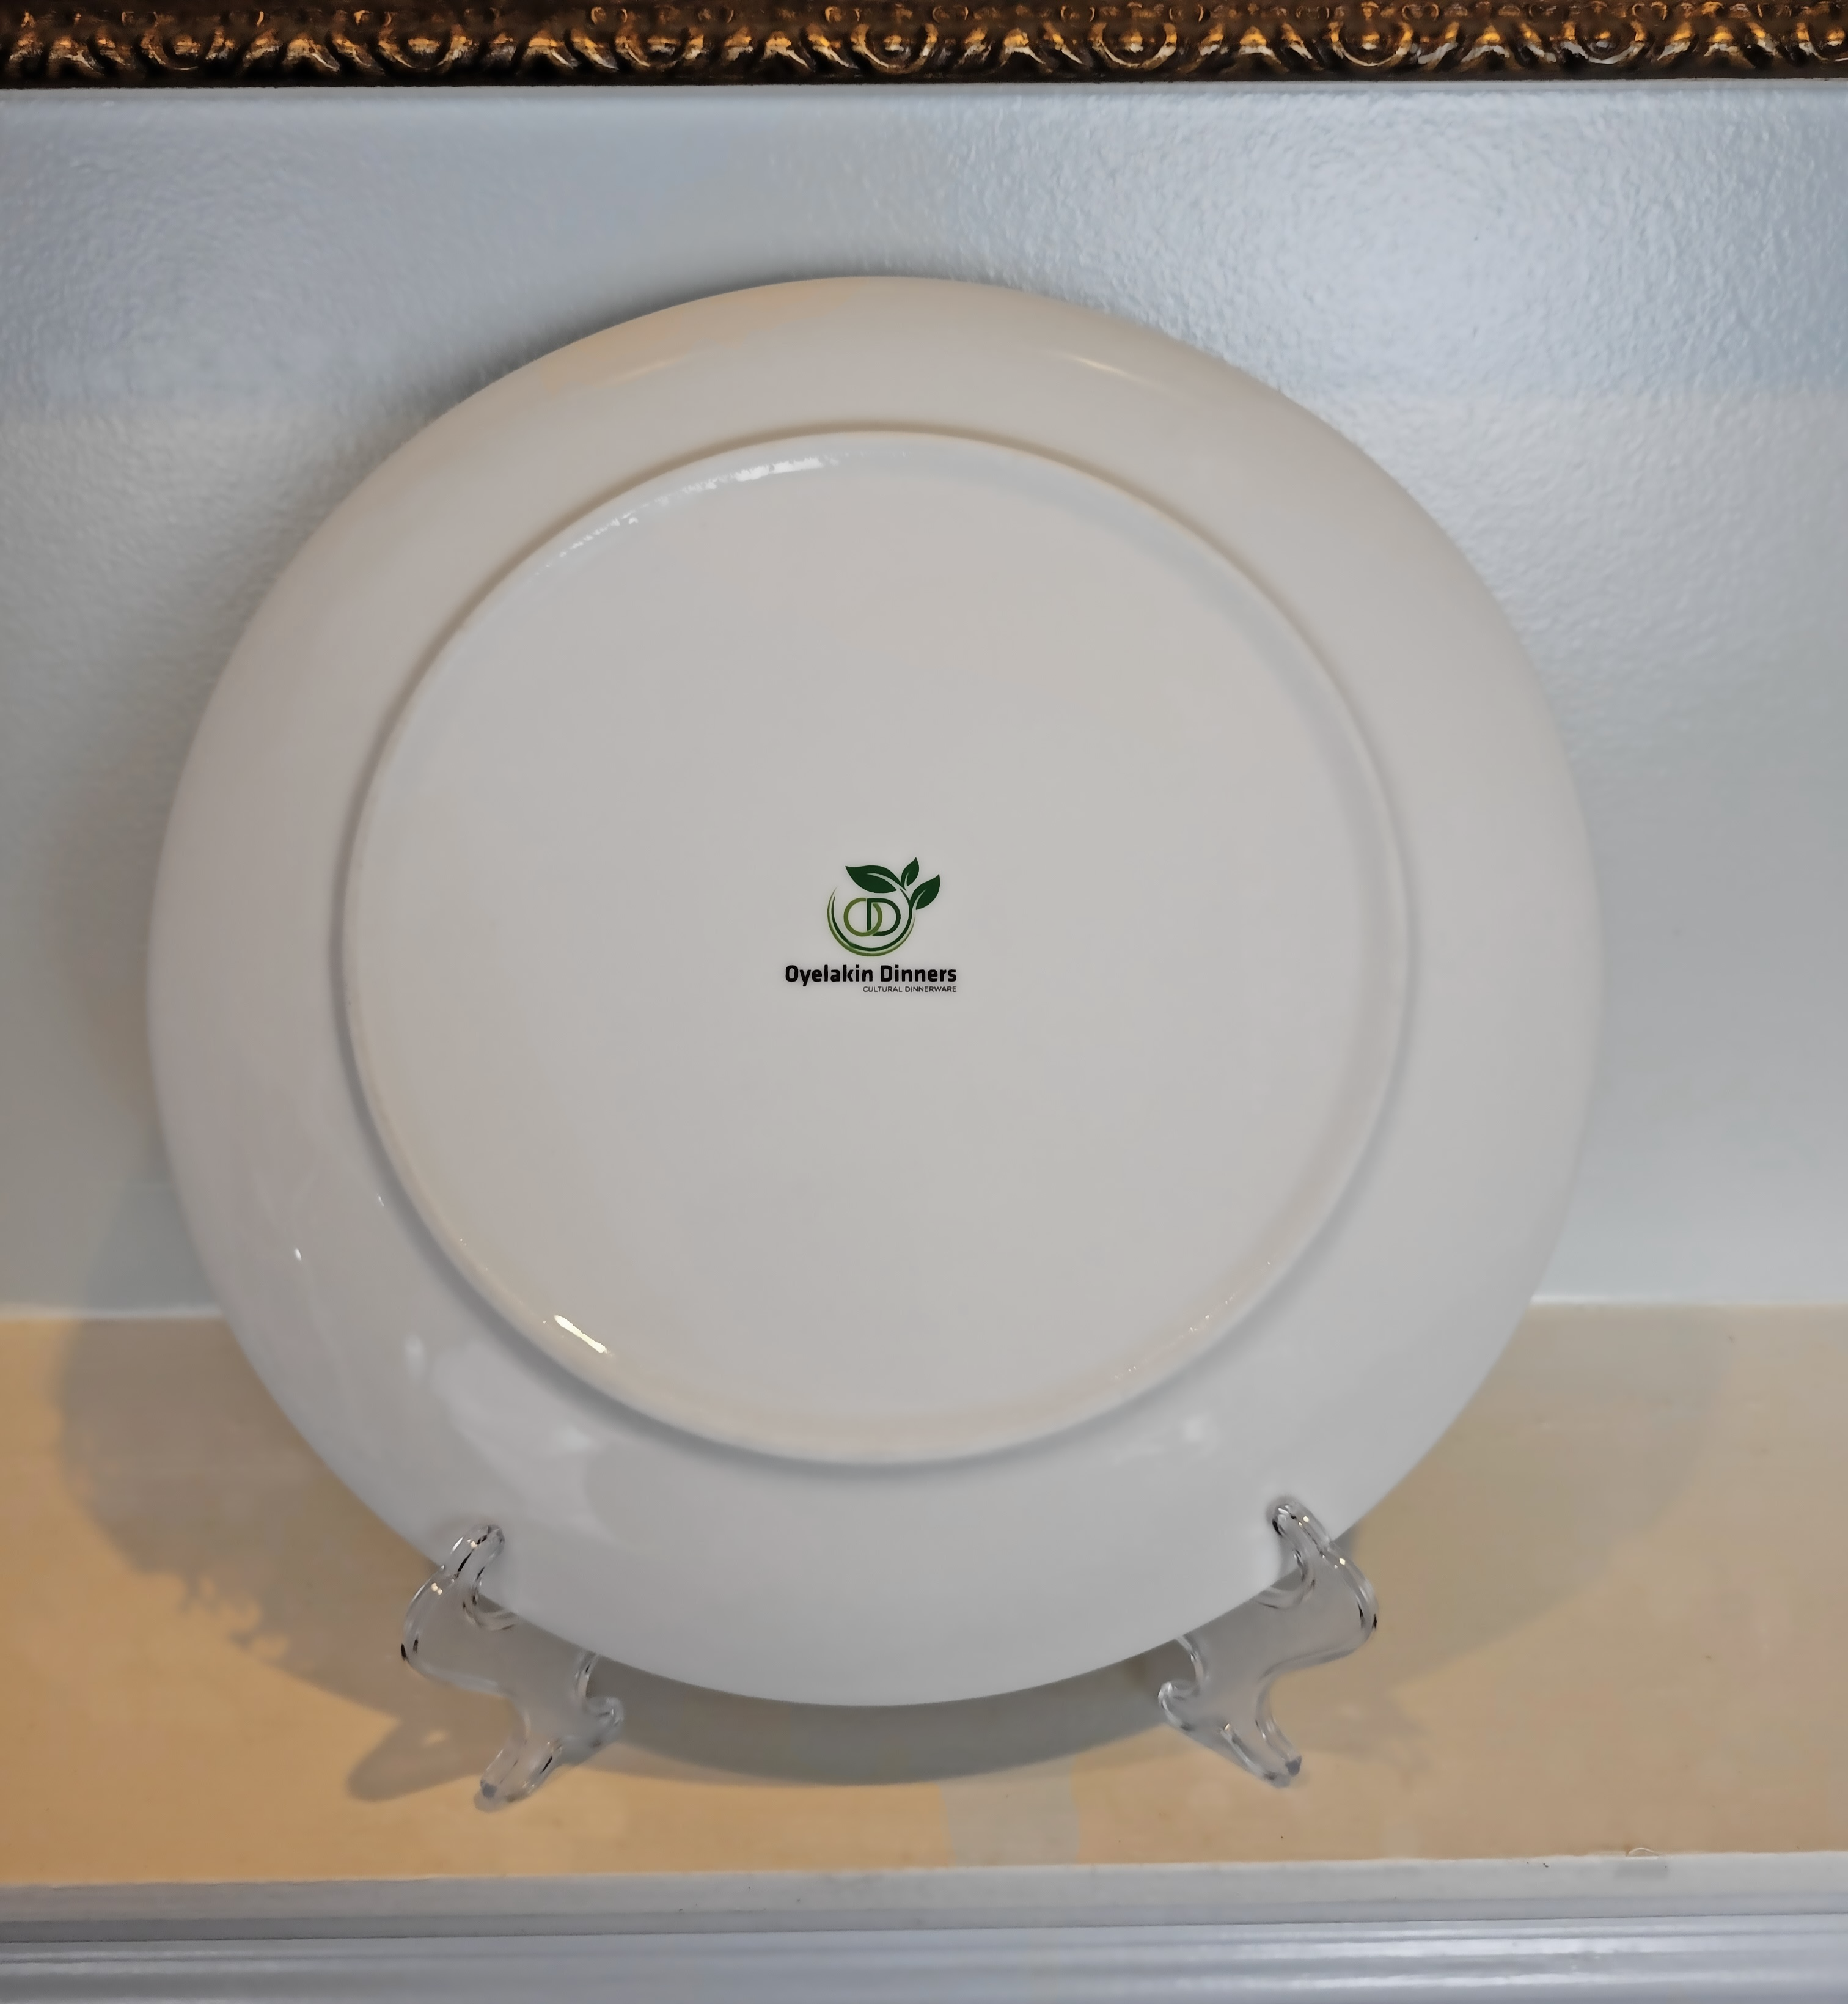 This is displaying the back of a dinner plate placed on a plate easel. The back of the plate shows the brand logo 